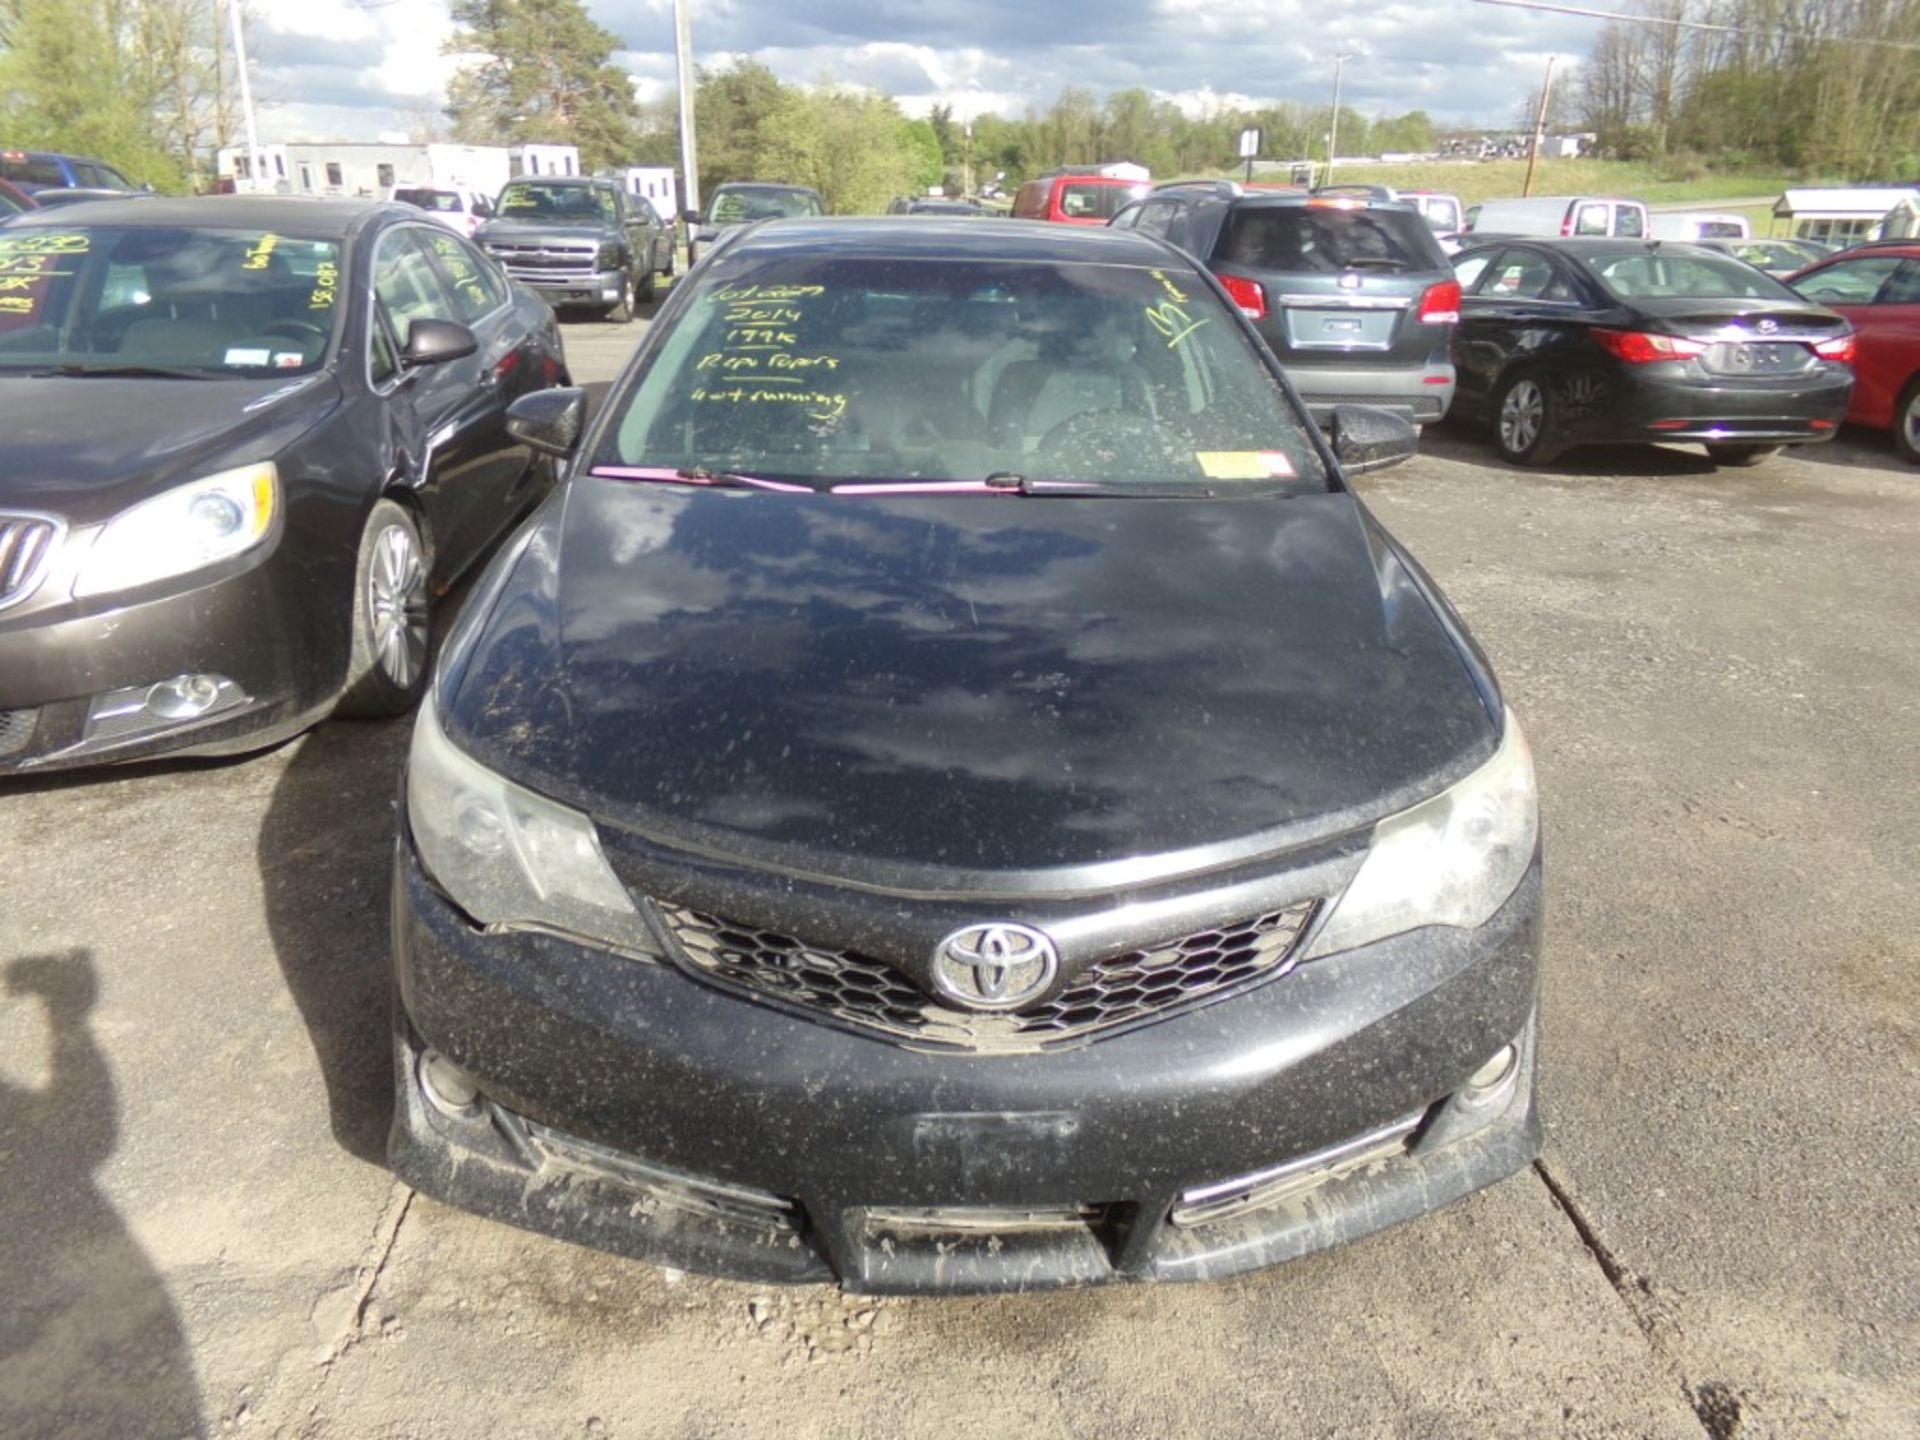 2014 Toyota Camry, Black, Auto Trans., Leather, 199K Miles, CONDITION UNKNOWN-NOT RUNNING-NEEDS